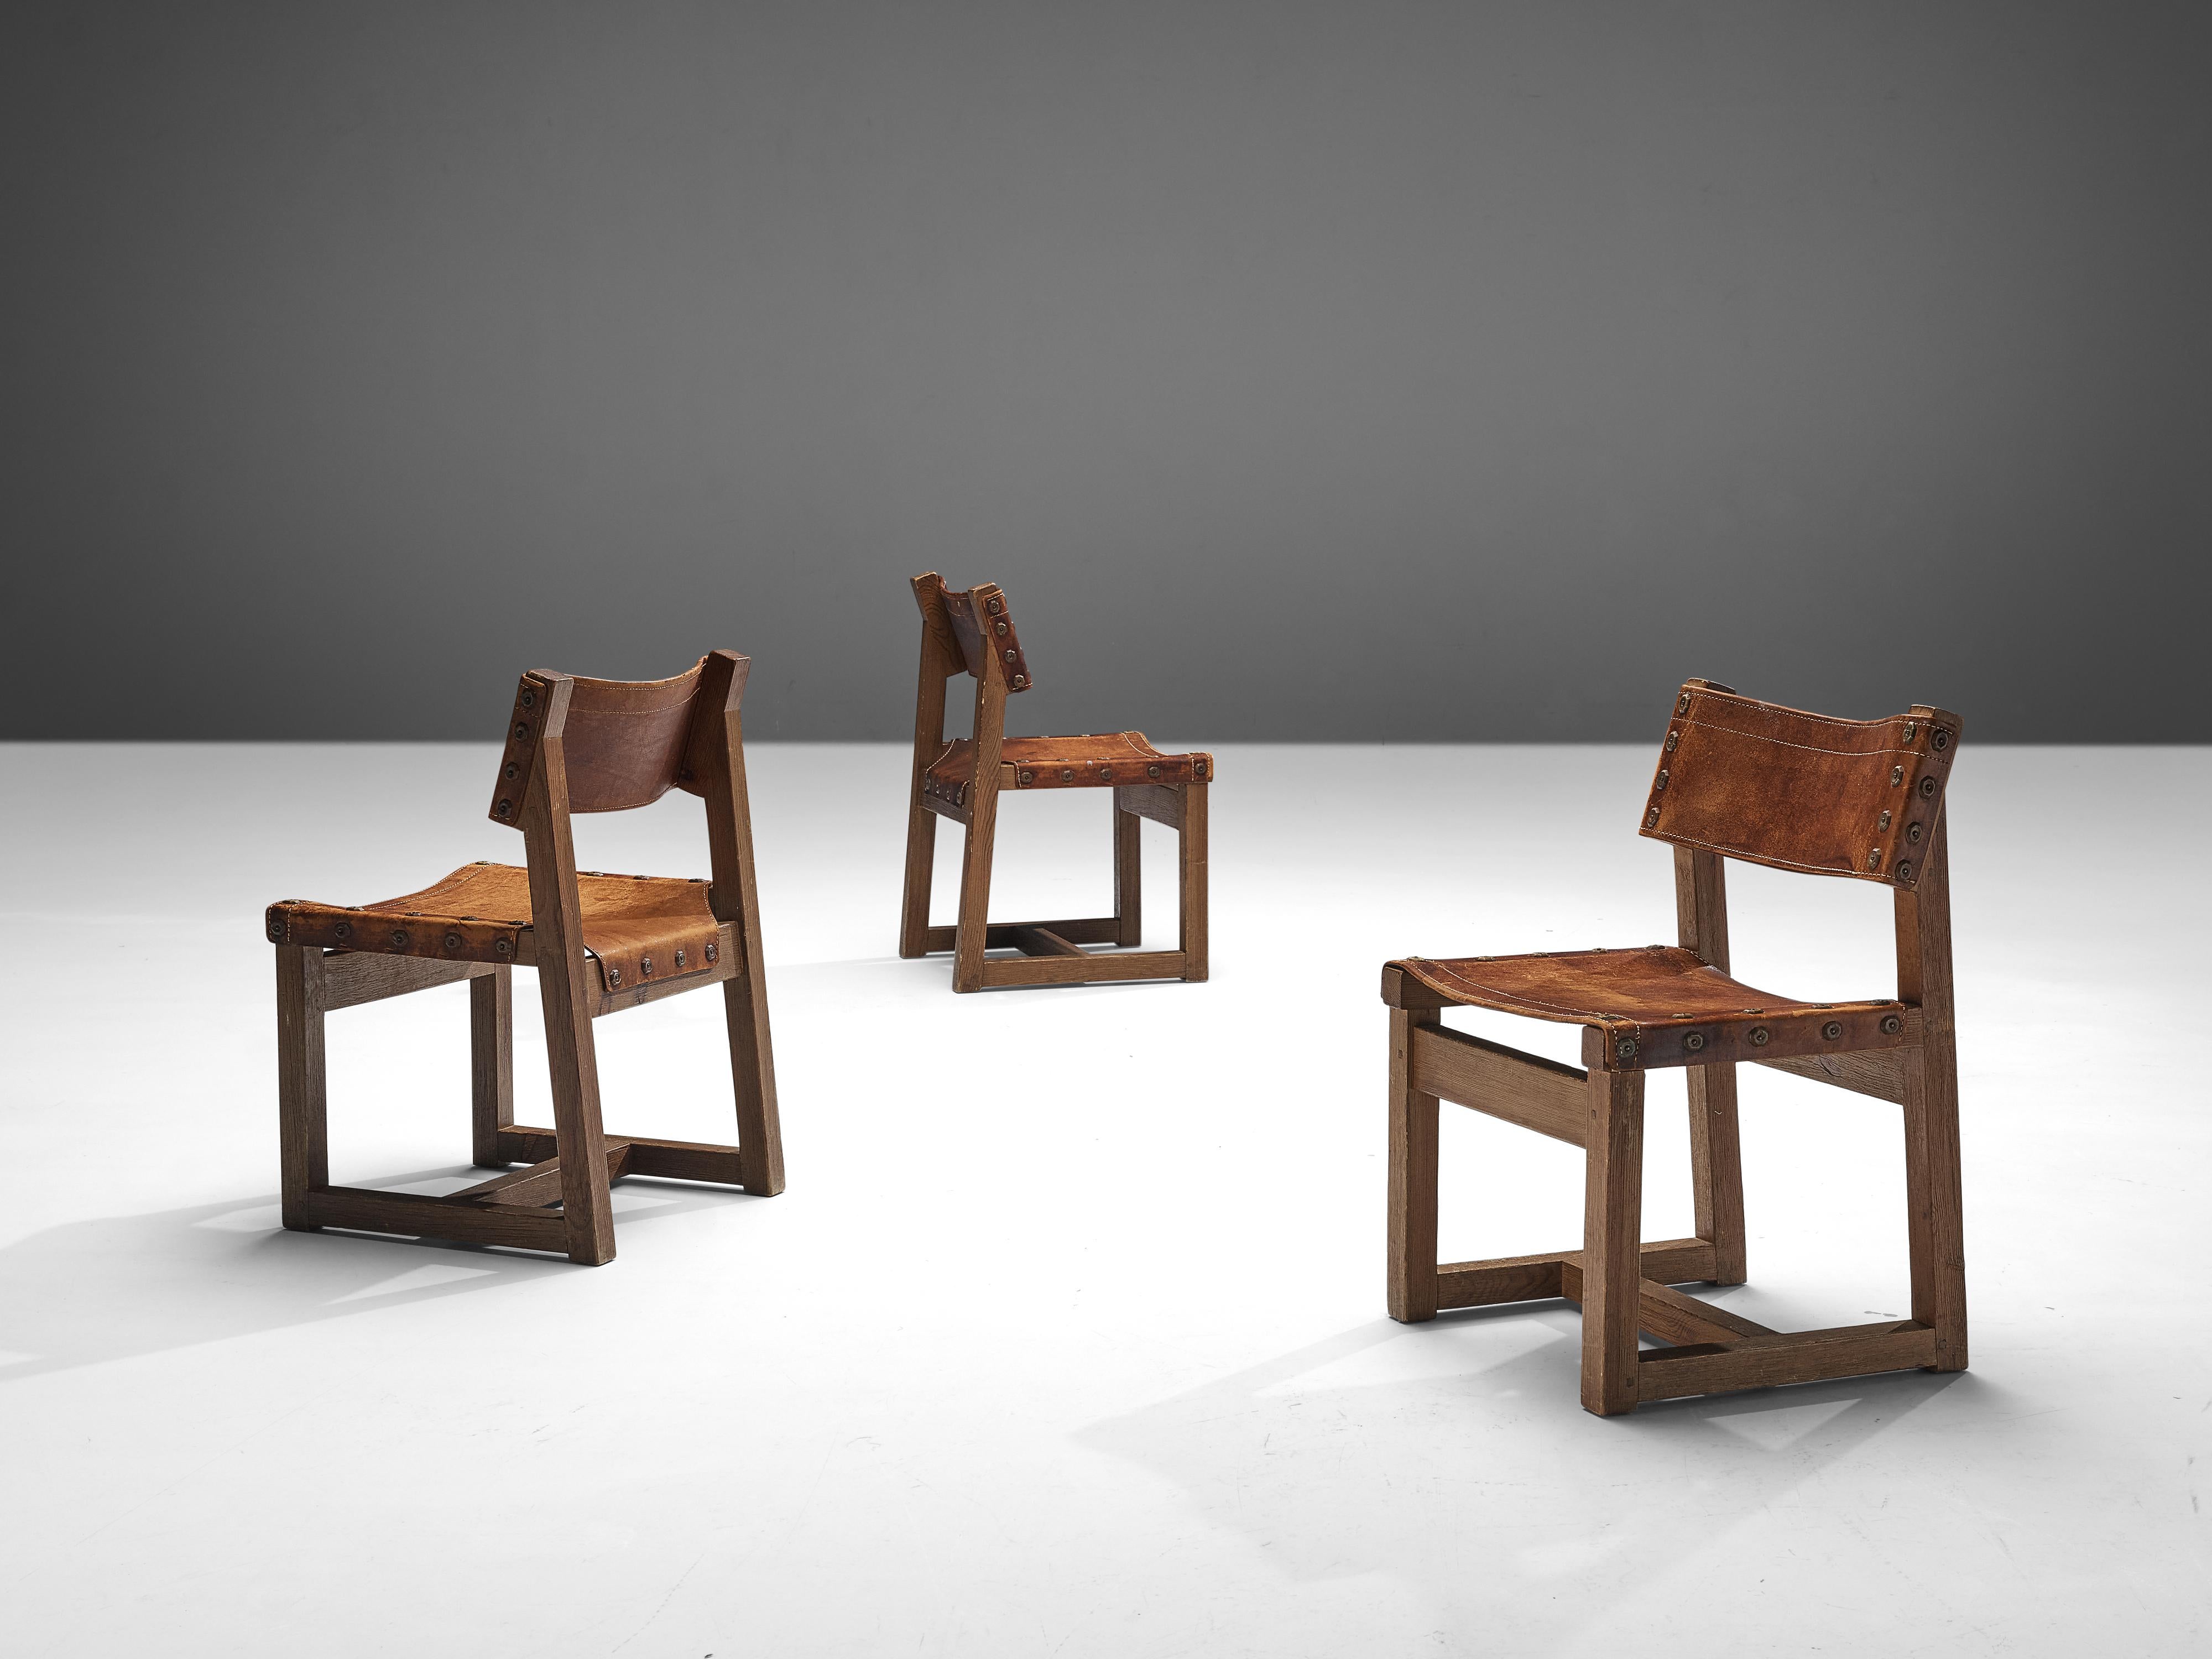 Brutalist Spanish Biosca Set of Four Dining chairs in Cognac Leather 2